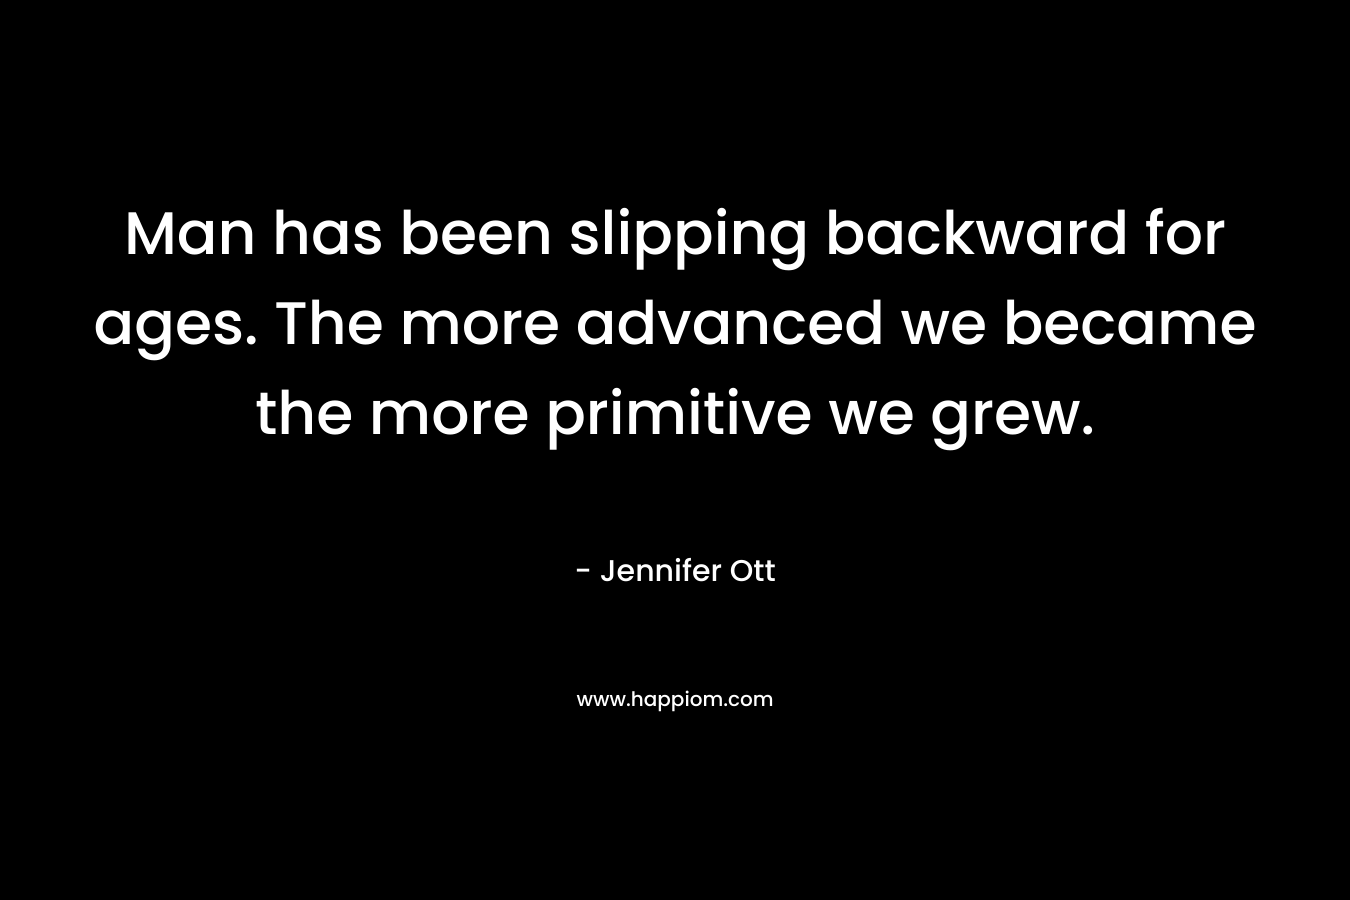 Man has been slipping backward for ages. The more advanced we became the more primitive we grew.